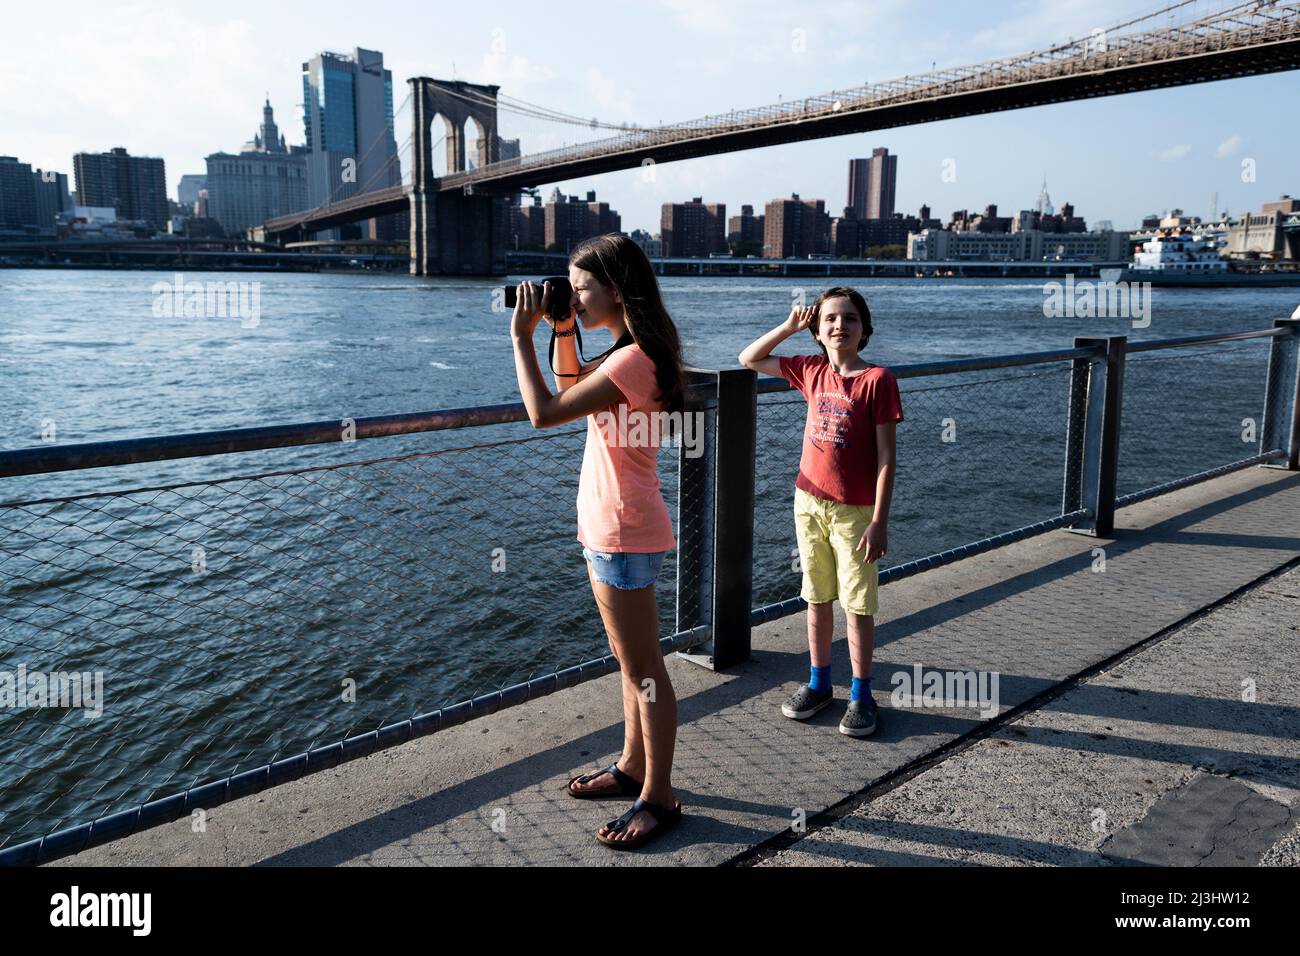 Dumbo/FULTON FERRY, New York City, NY, USA, 14 years old caucasian teenager girl and 12 years old caucasian teenager boy - both with brown hair and summer styling in front of the Brooklyn Bridge over East River Stock Photo